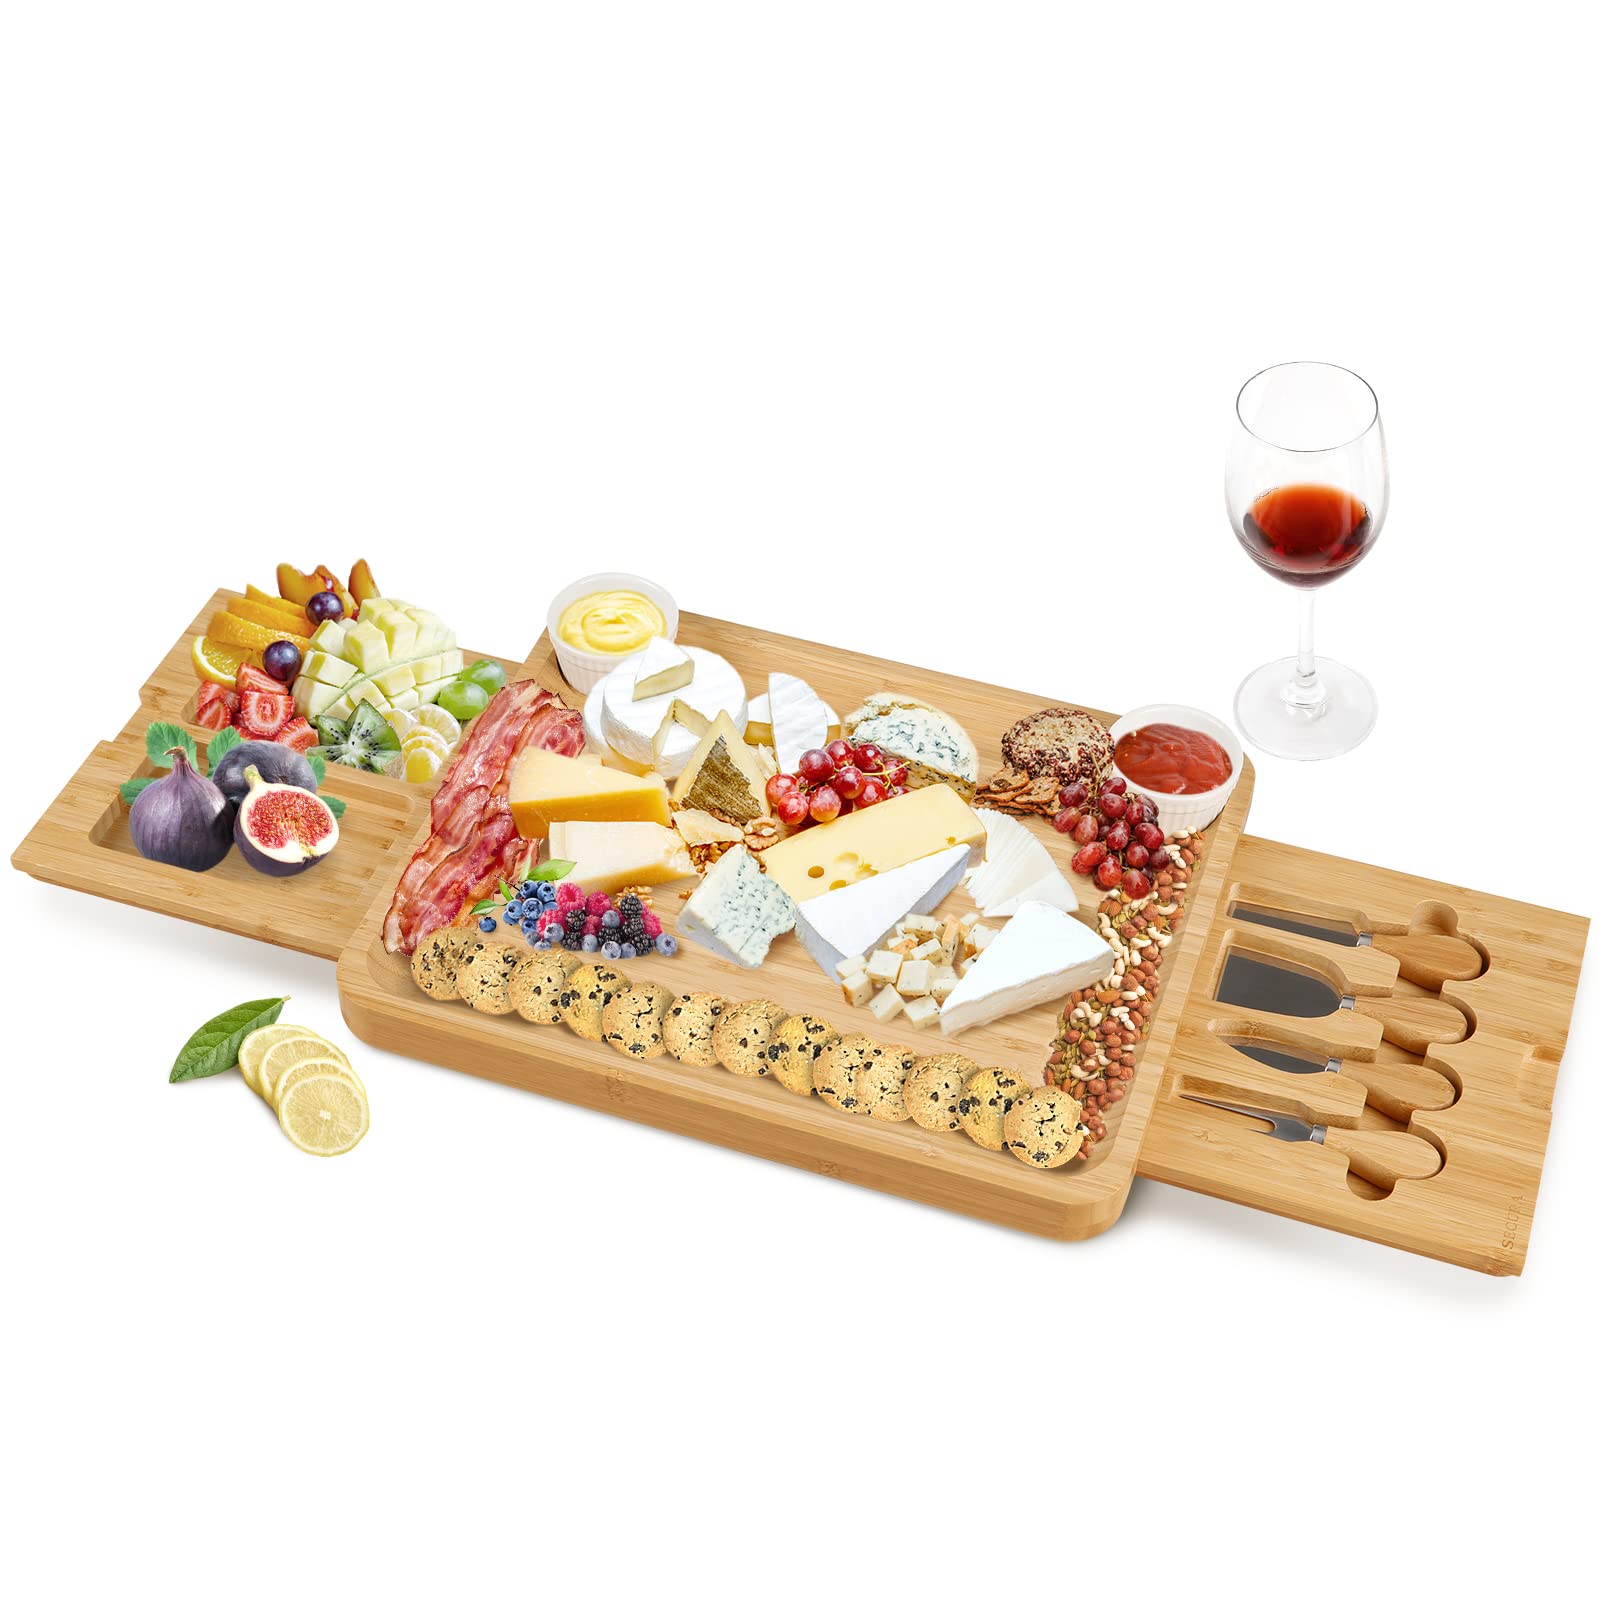 Secura Cheese Board Set, Bamboo Charcuterie Board Meat Platter Serving Tray and Knife Set with 2 Ceramic Bowls, Gift for Mother's Day Easter Thanksgiving Christmas Housewarming Wedding Anniversary